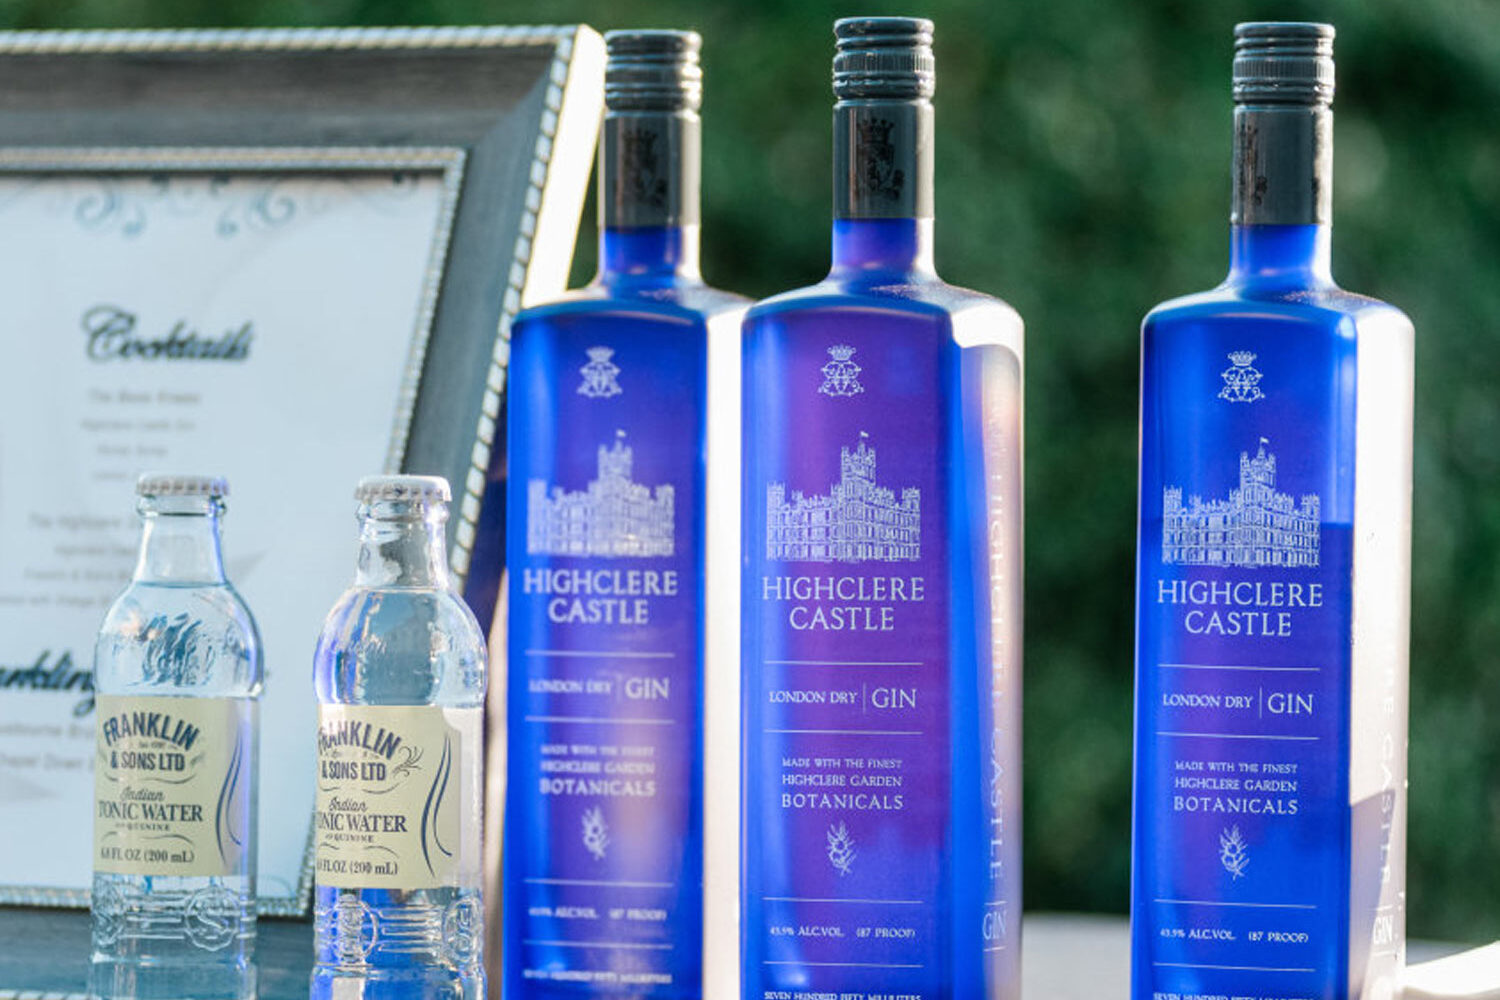 QCT is proud to announce partnership with Highclere Castle Gin